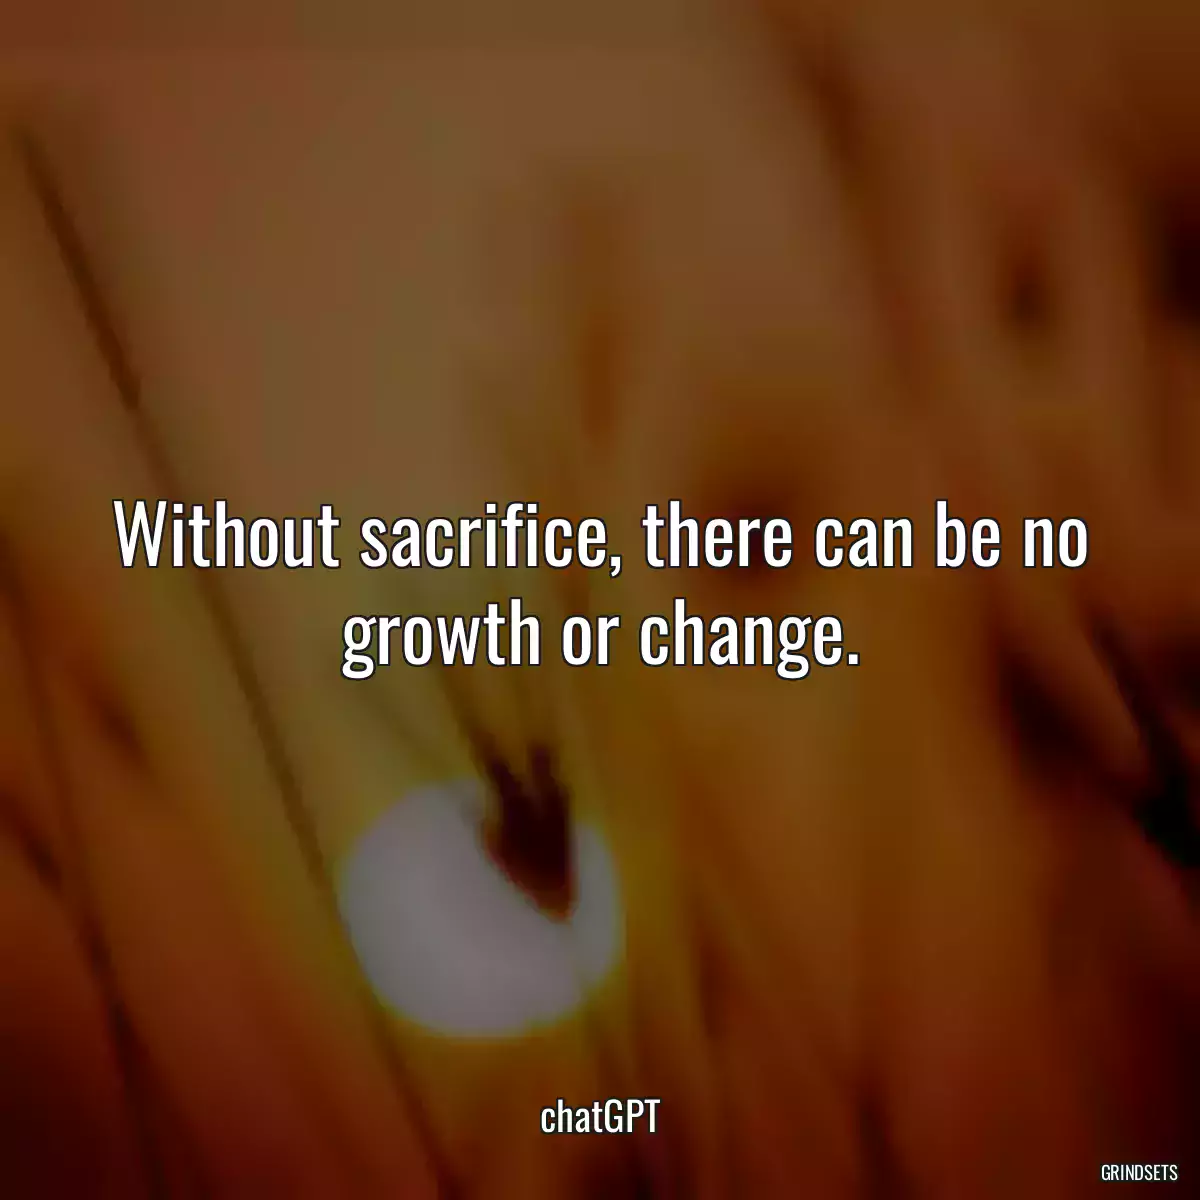 Without sacrifice, there can be no growth or change.